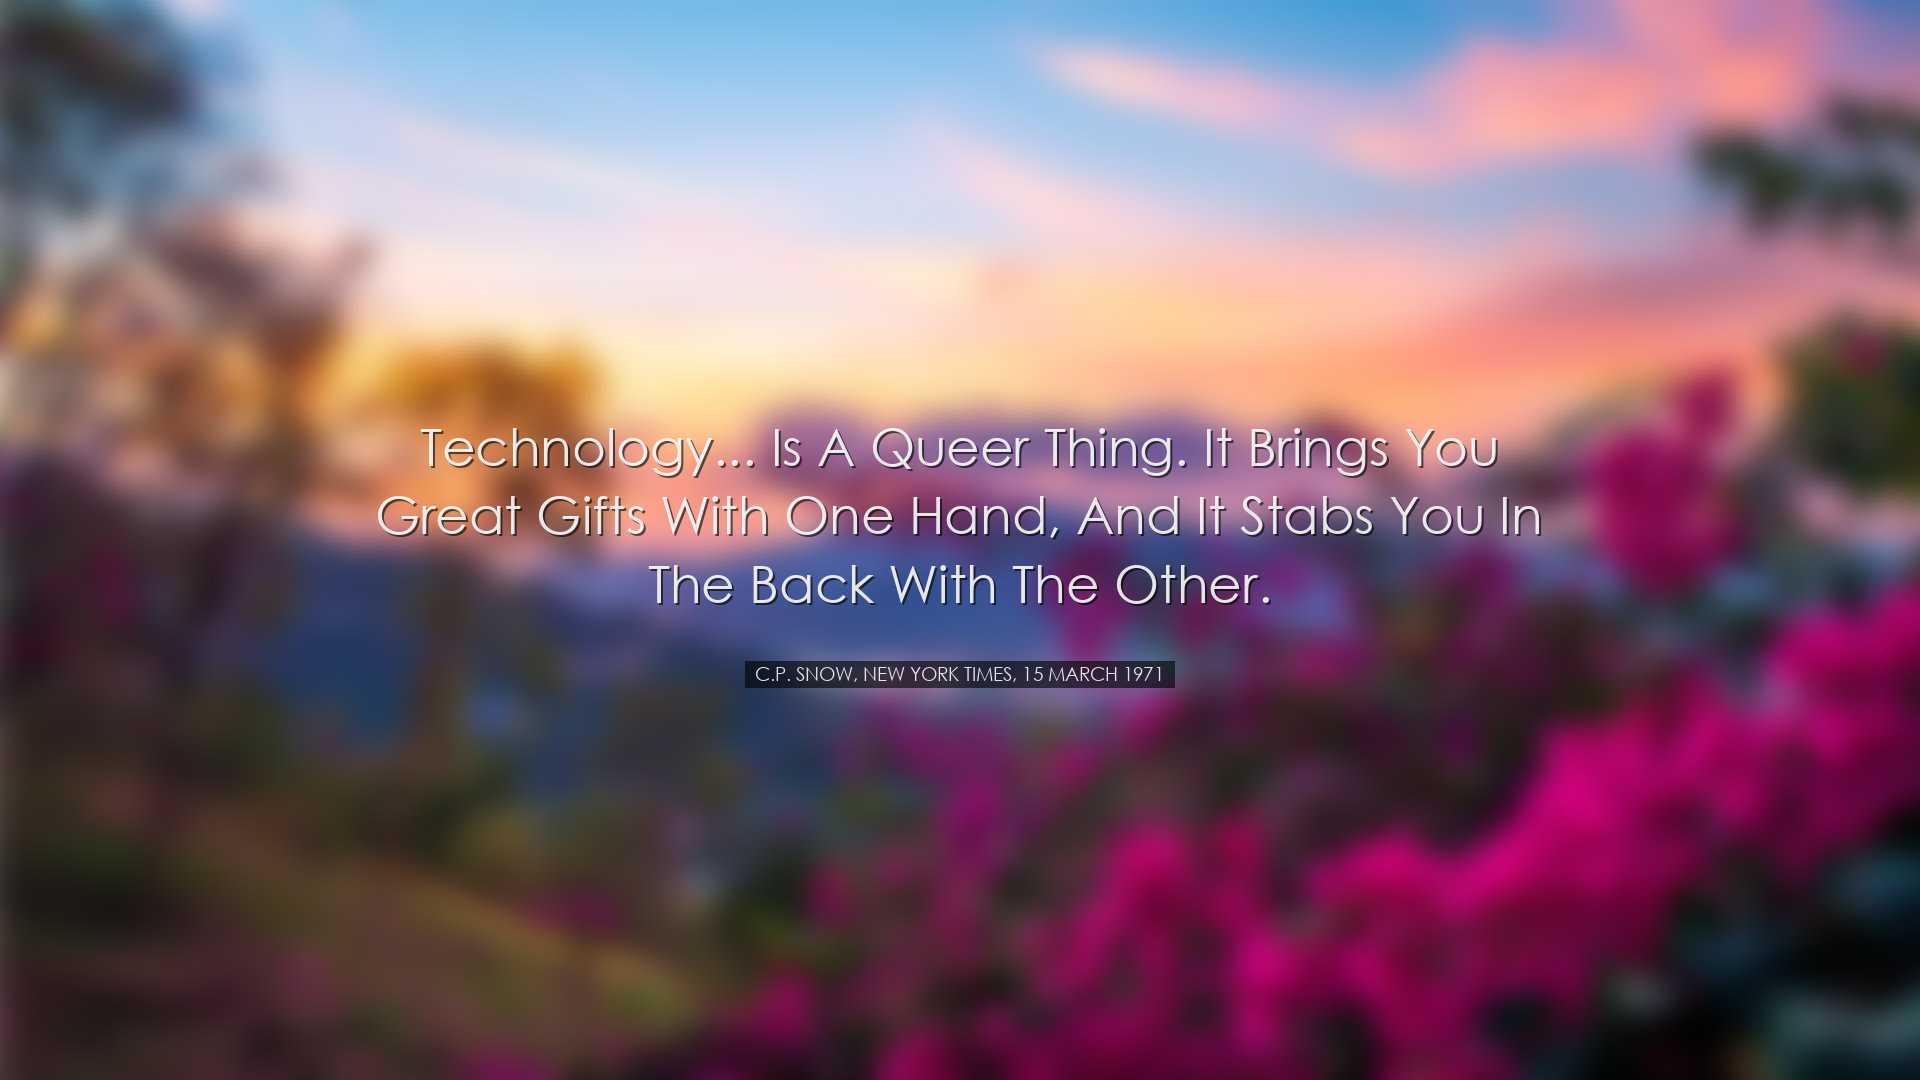 Technology... is a queer thing. It brings you great gifts with one